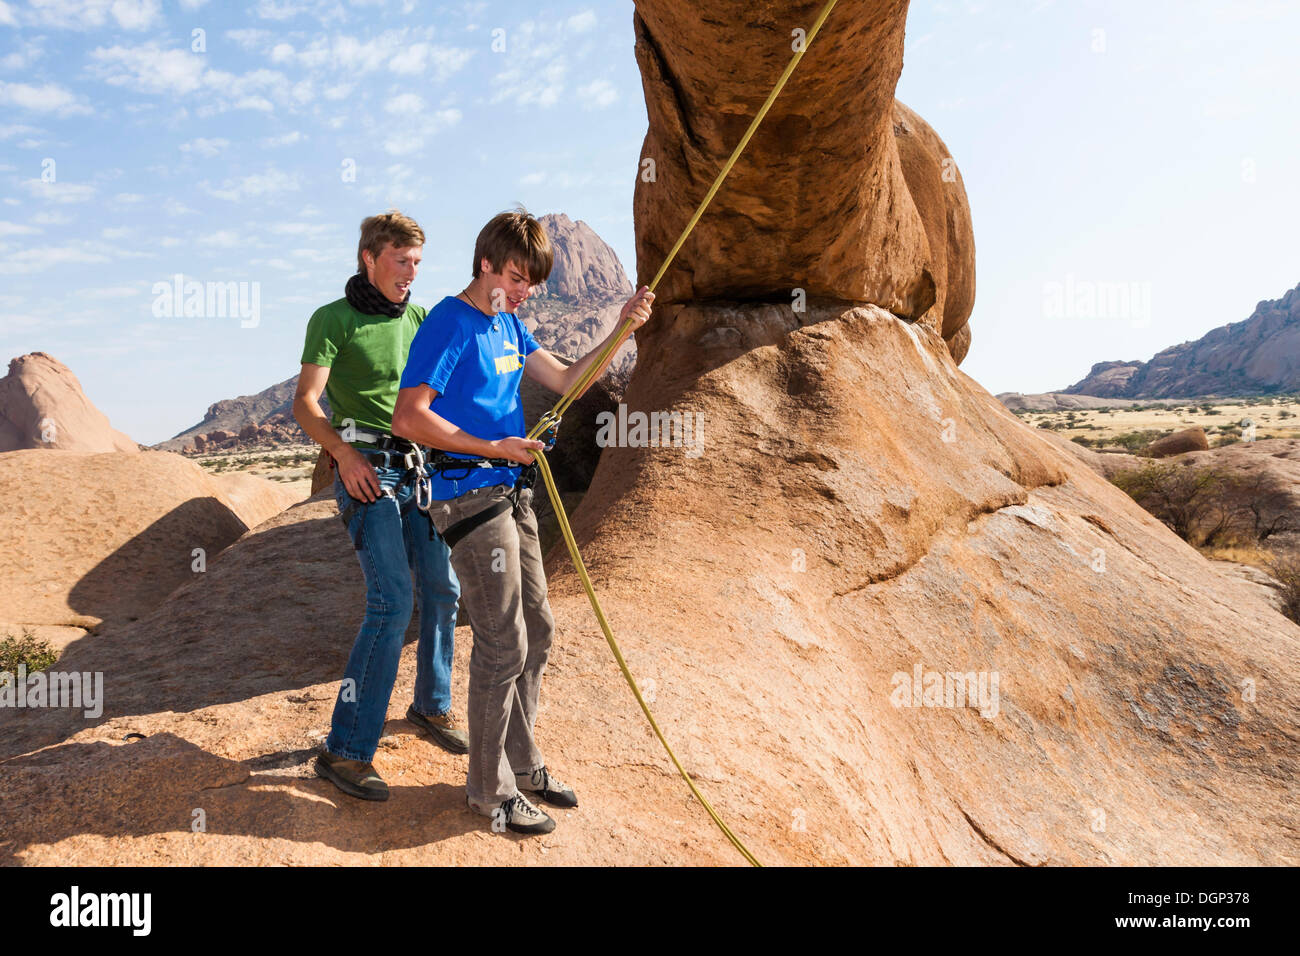 Young men hanging in a climbing rope, Bogenfels, Spitzkoppe, Namibia, Africa Stock Photo